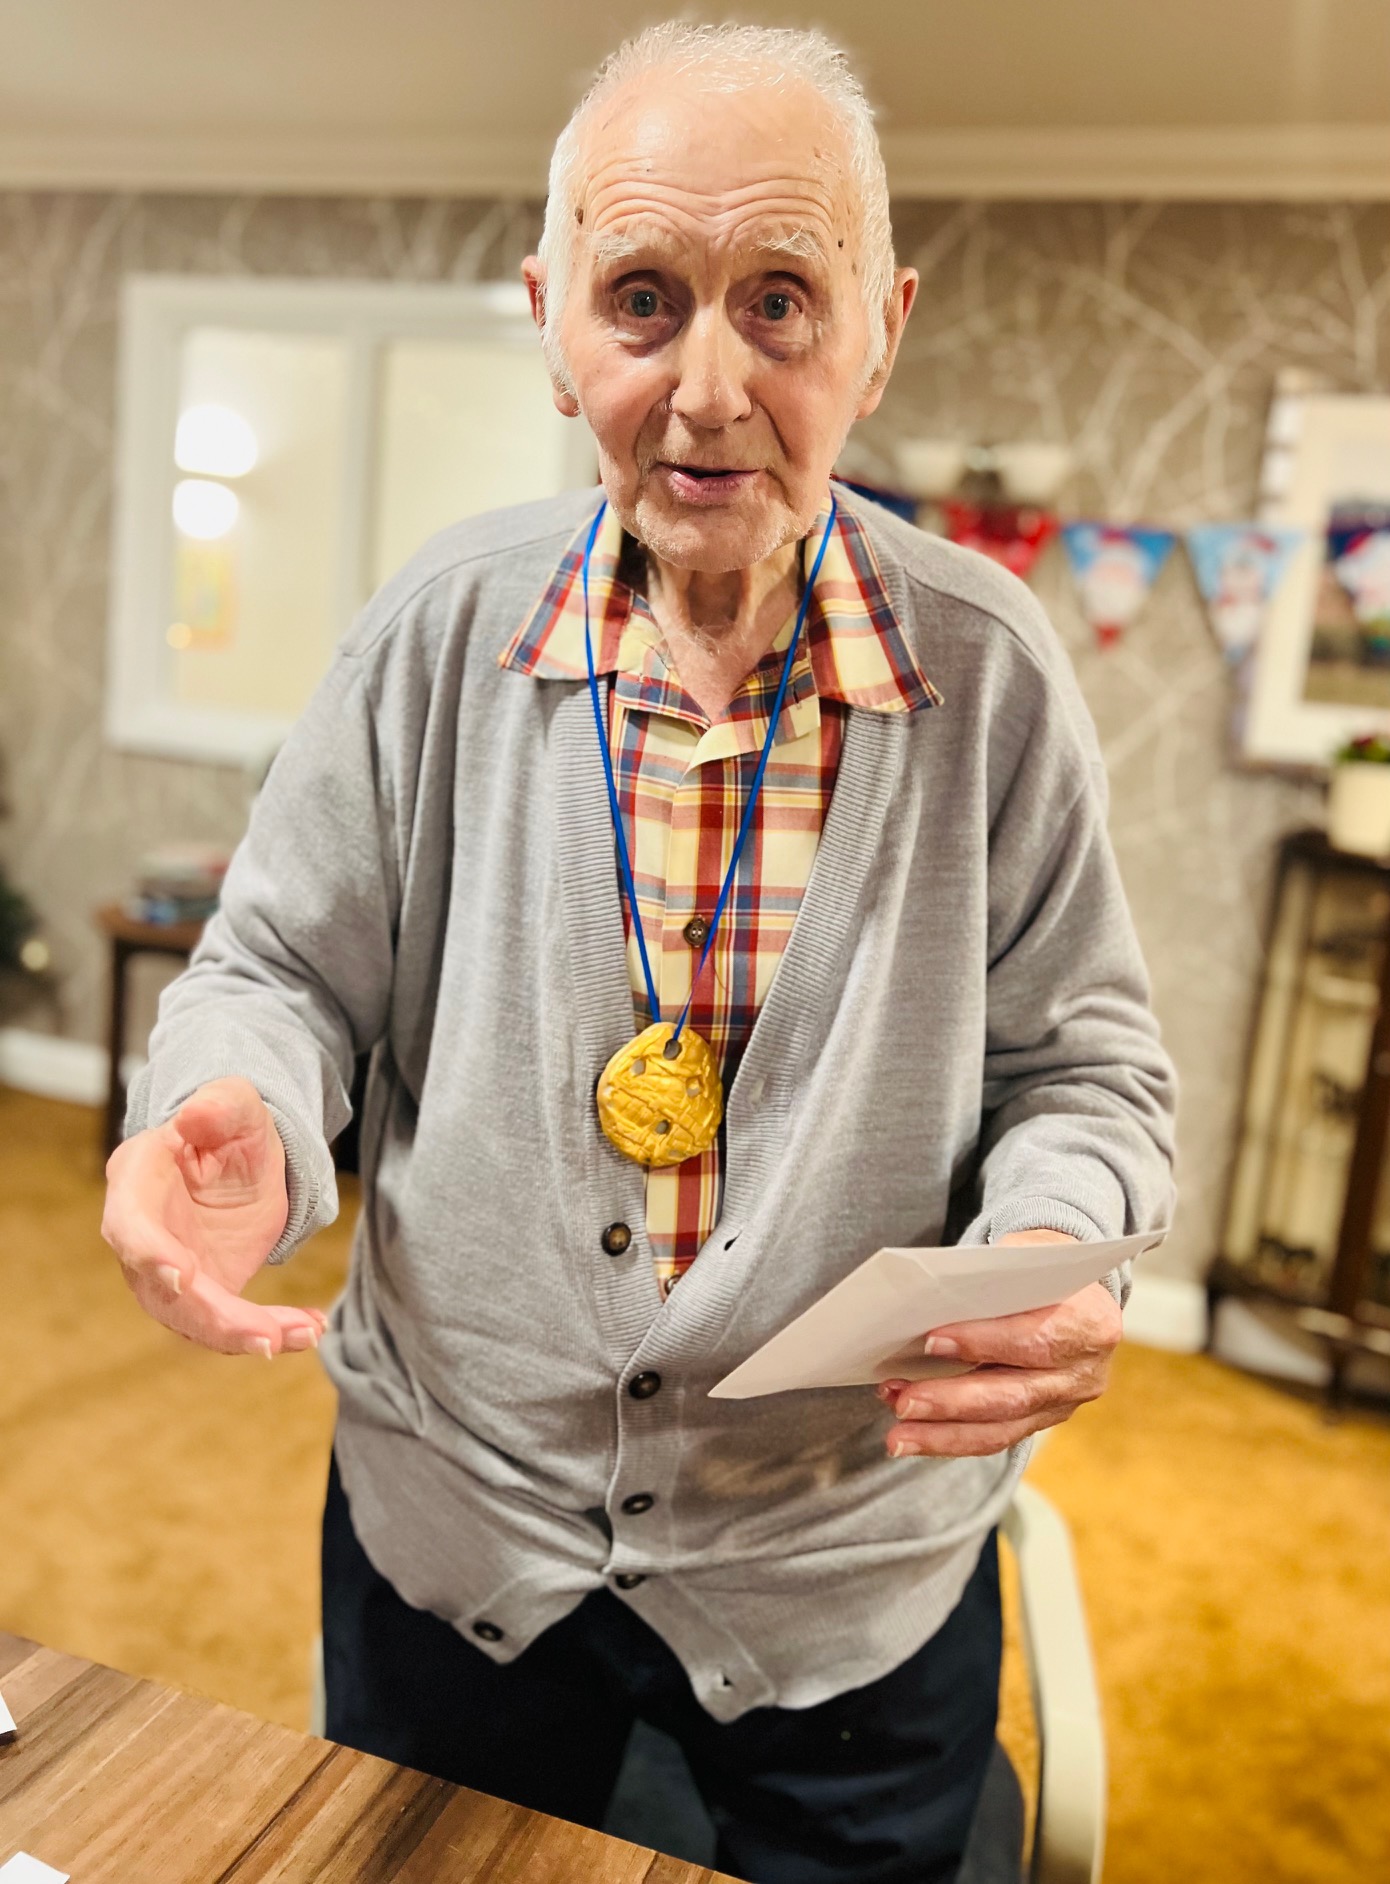 A gentleman wearing a check shirt and grey cardigan, with a gold medallion around his neck, looks to camera with his right hand outstretched